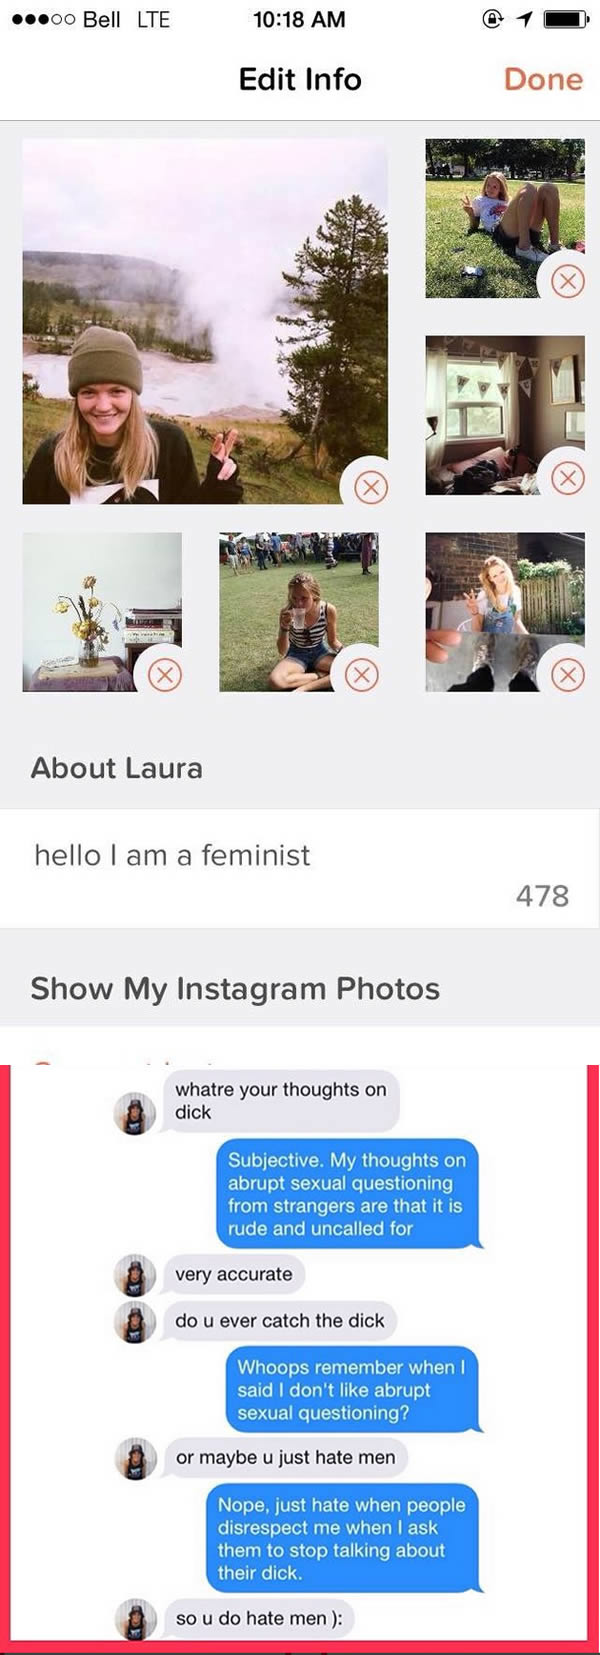 No matter which way you swipe, misogyny comes from all angles on Tinder. 

The Instagram account Feminist_Tinder is bringing certain dudes into the limelight by highlighting the sexist messages one woman received when she put the word "feminist" in her Tinder bio. 

Created by Laura Nowak, the account includes screen shots of different conversations she has had with men on Tinder and their reactions to her "feminist" description. Nowak's snarky and smart retorts make the account educational as well as entertaining.

Her Instagram account hit a nerve, amassing over 21,000 followers. The messages highlighted on the account range from curious to blatantly sexist and threatening.

Nowak received one message that read: "Why are you on Tinder if you're a feminist?" Her response was perfection: "Why are you suggesting that casual sex and respect for women are mutually exclusive?"

"I think it's important to talk about these perspectives on feminism and highlight that misogynistic double standards are rampant and active in our culture," Nowak says.